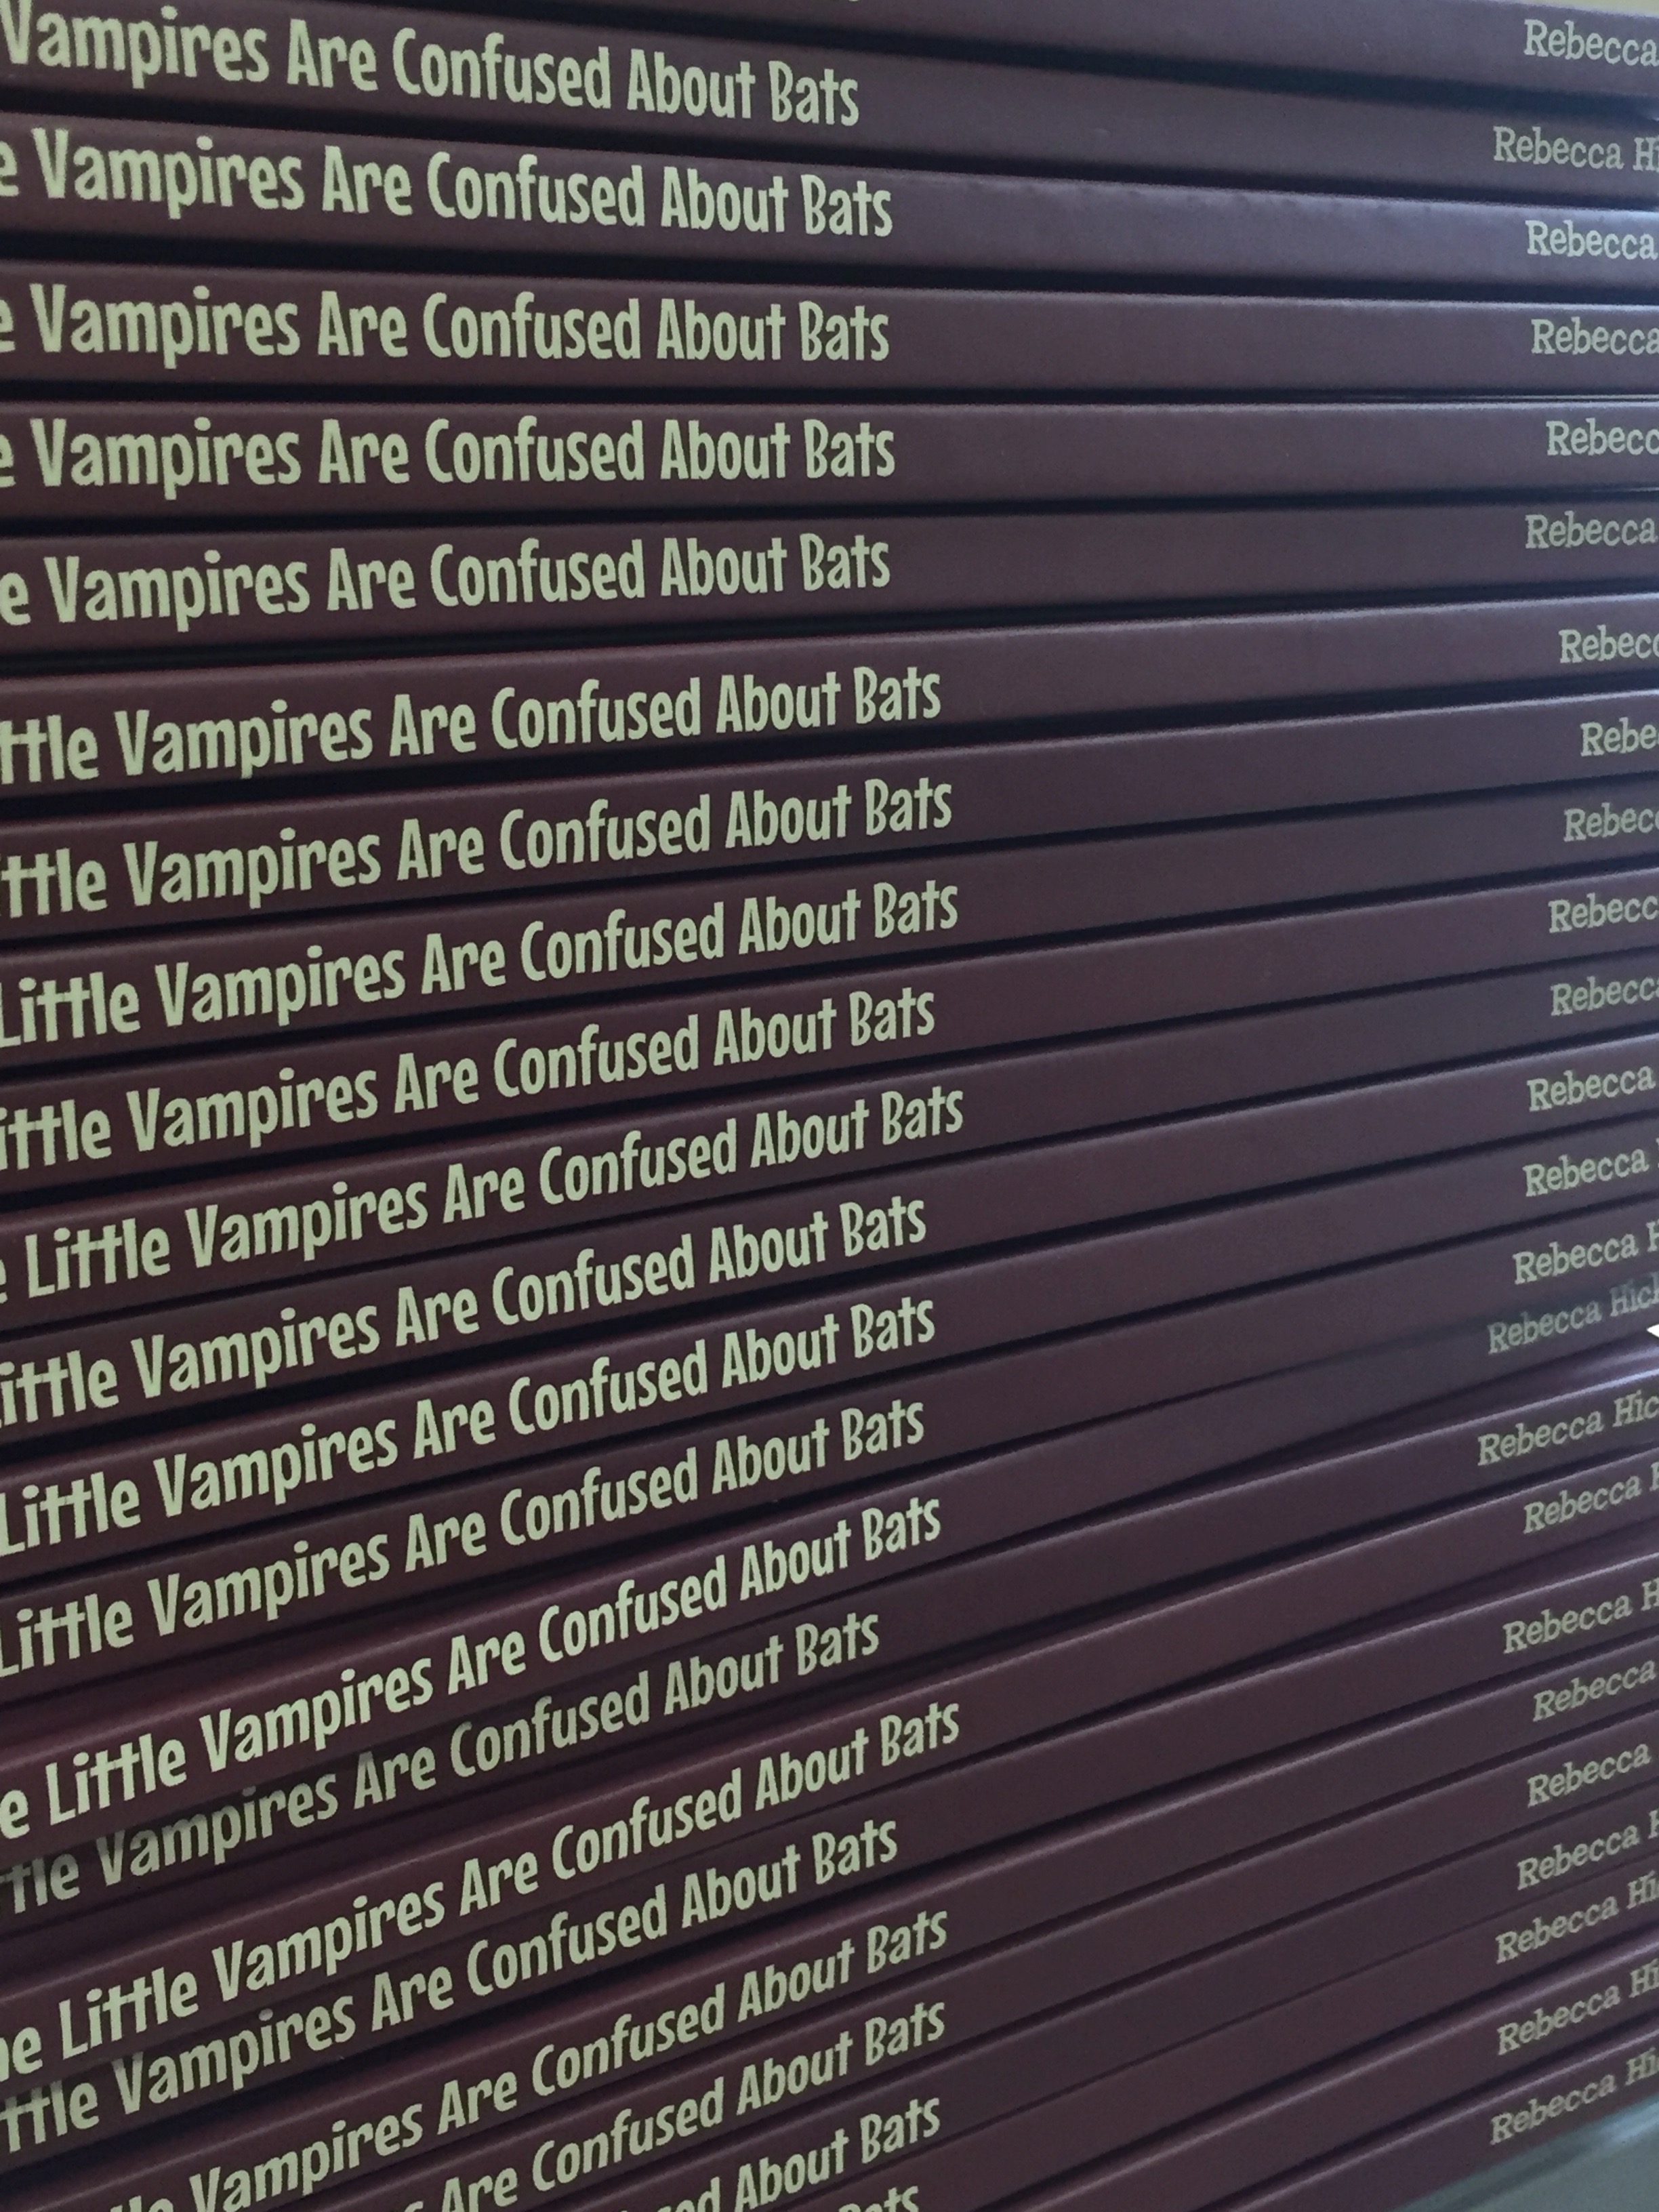 Photo of a stack of The Little Vampires Are Confused About Bats books